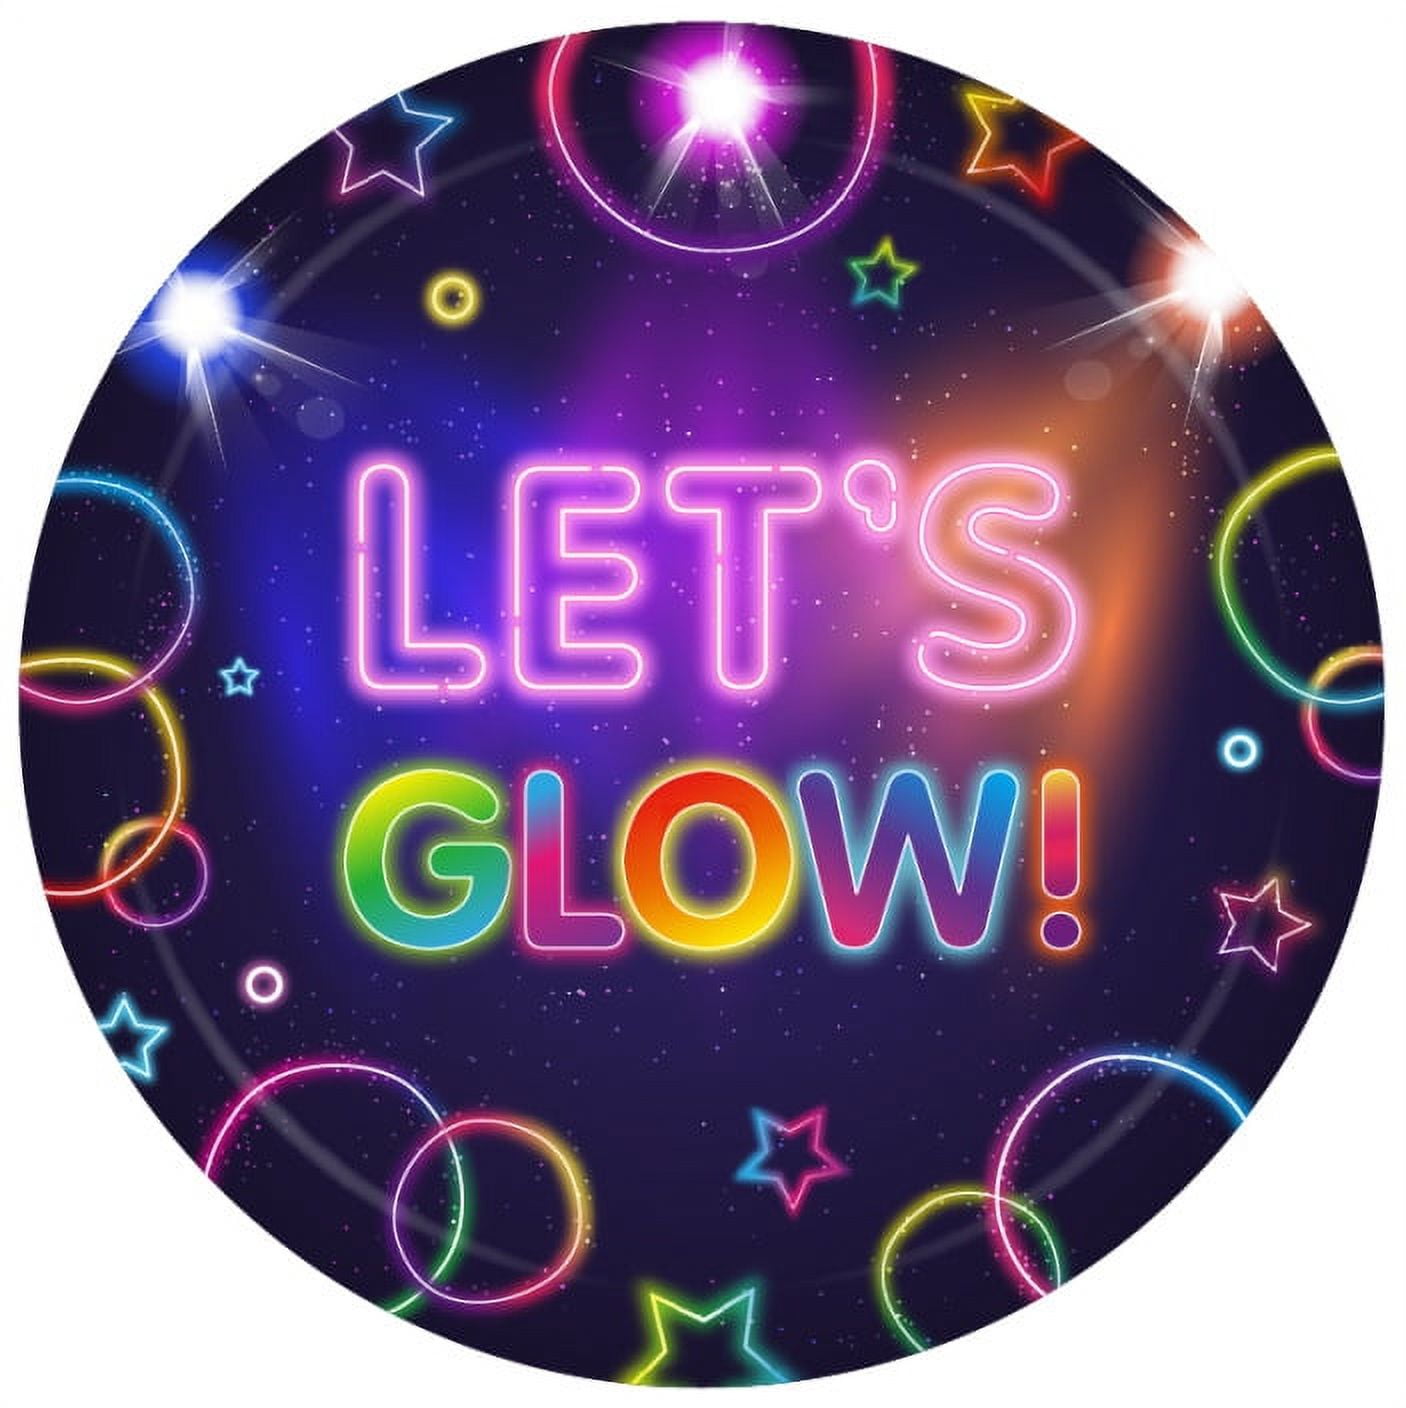 Glow Party Value Party Supplies Pack (58+ Pieces for 16 Guests), Value Party Kit, Glow Party Plates, Glow Birthday, Napkins, Forks, Tableware